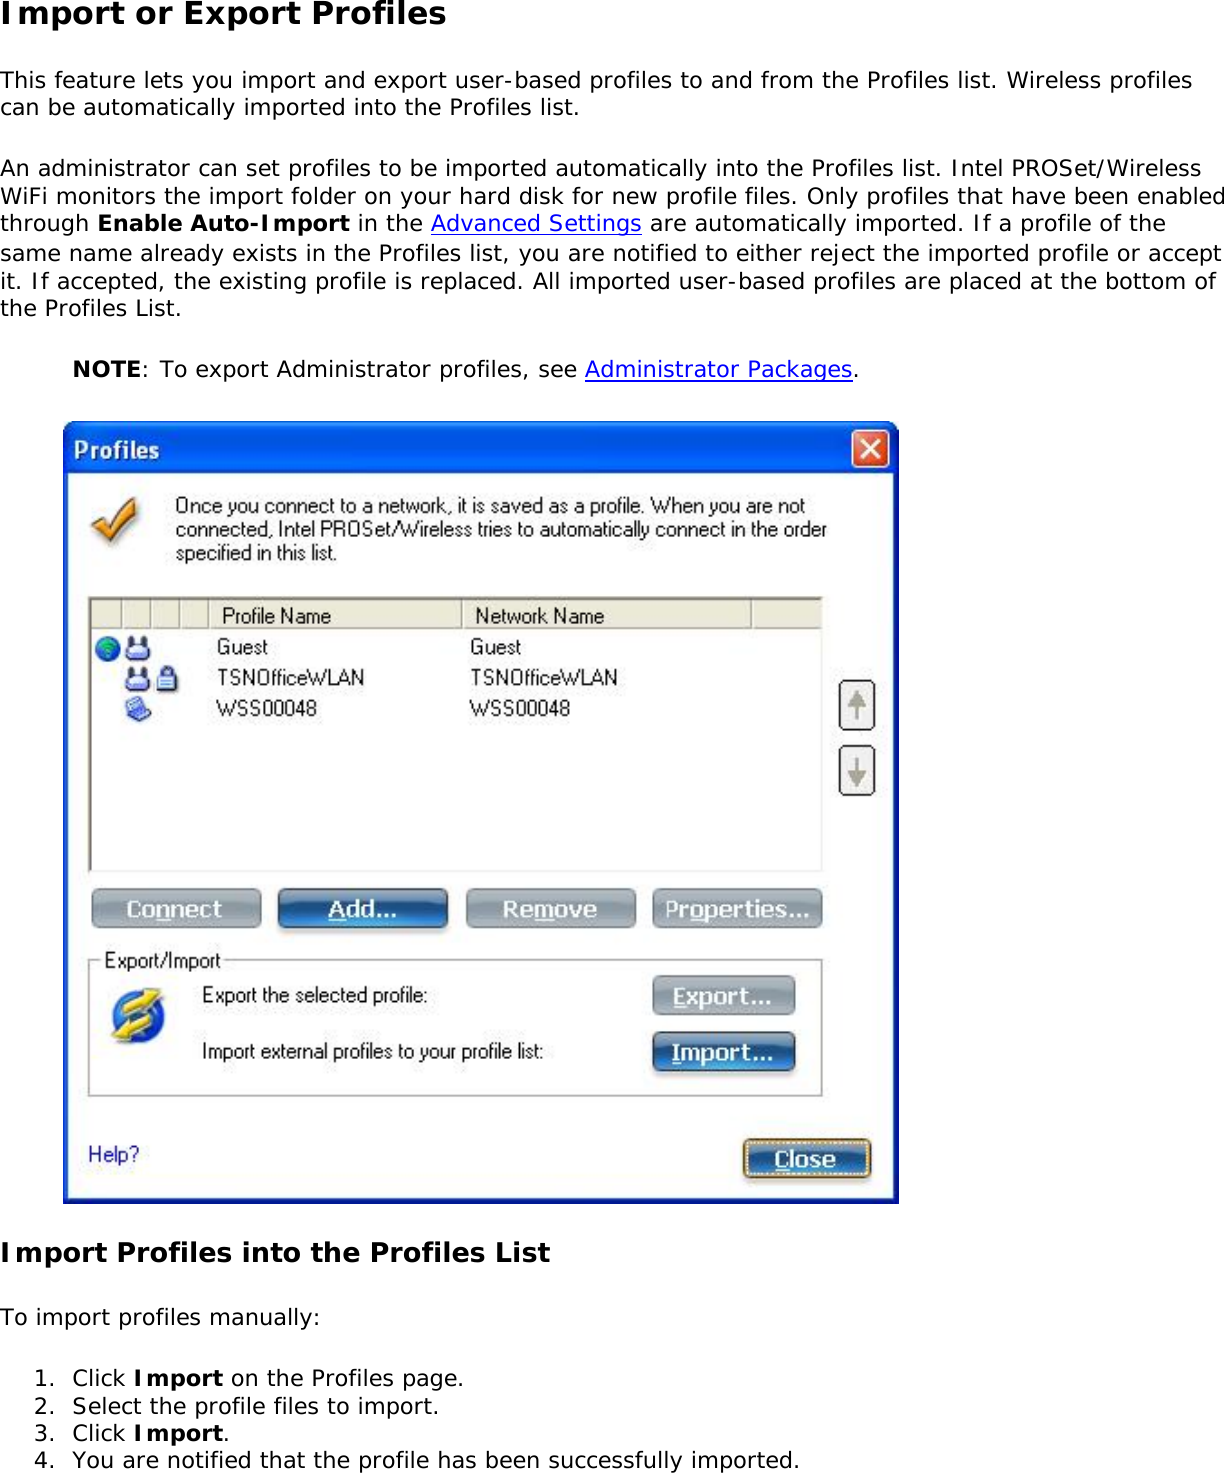 Import or Export ProfilesThis feature lets you import and export user-based profiles to and from the Profiles list. Wireless profiles can be automatically imported into the Profiles list. An administrator can set profiles to be imported automatically into the Profiles list. Intel PROSet/Wireless WiFi monitors the import folder on your hard disk for new profile files. Only profiles that have been enabled through Enable Auto-Import in the Advanced Settings are automatically imported. If a profile of the same name already exists in the Profiles list, you are notified to either reject the imported profile or accept it. If accepted, the existing profile is replaced. All imported user-based profiles are placed at the bottom of the Profiles List. NOTE: To export Administrator profiles, see Administrator Packages. Import Profiles into the Profiles ListTo import profiles manually: 1.  Click Import on the Profiles page.2.  Select the profile files to import.3.  Click Import.4.  You are notified that the profile has been successfully imported.